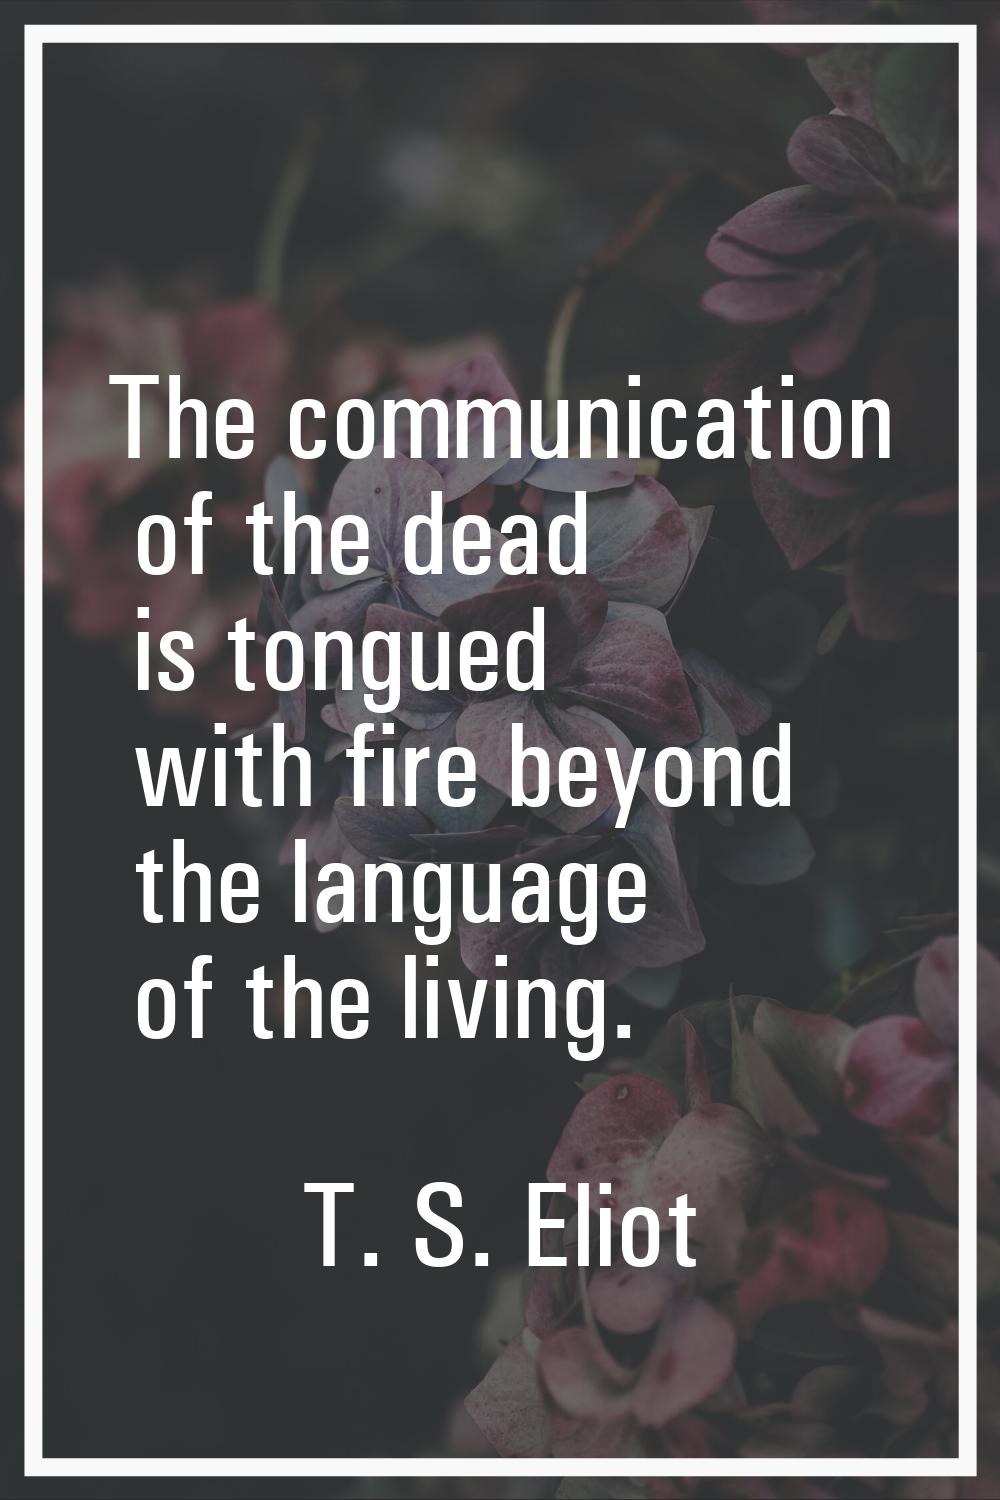 The communication of the dead is tongued with fire beyond the language of the living.